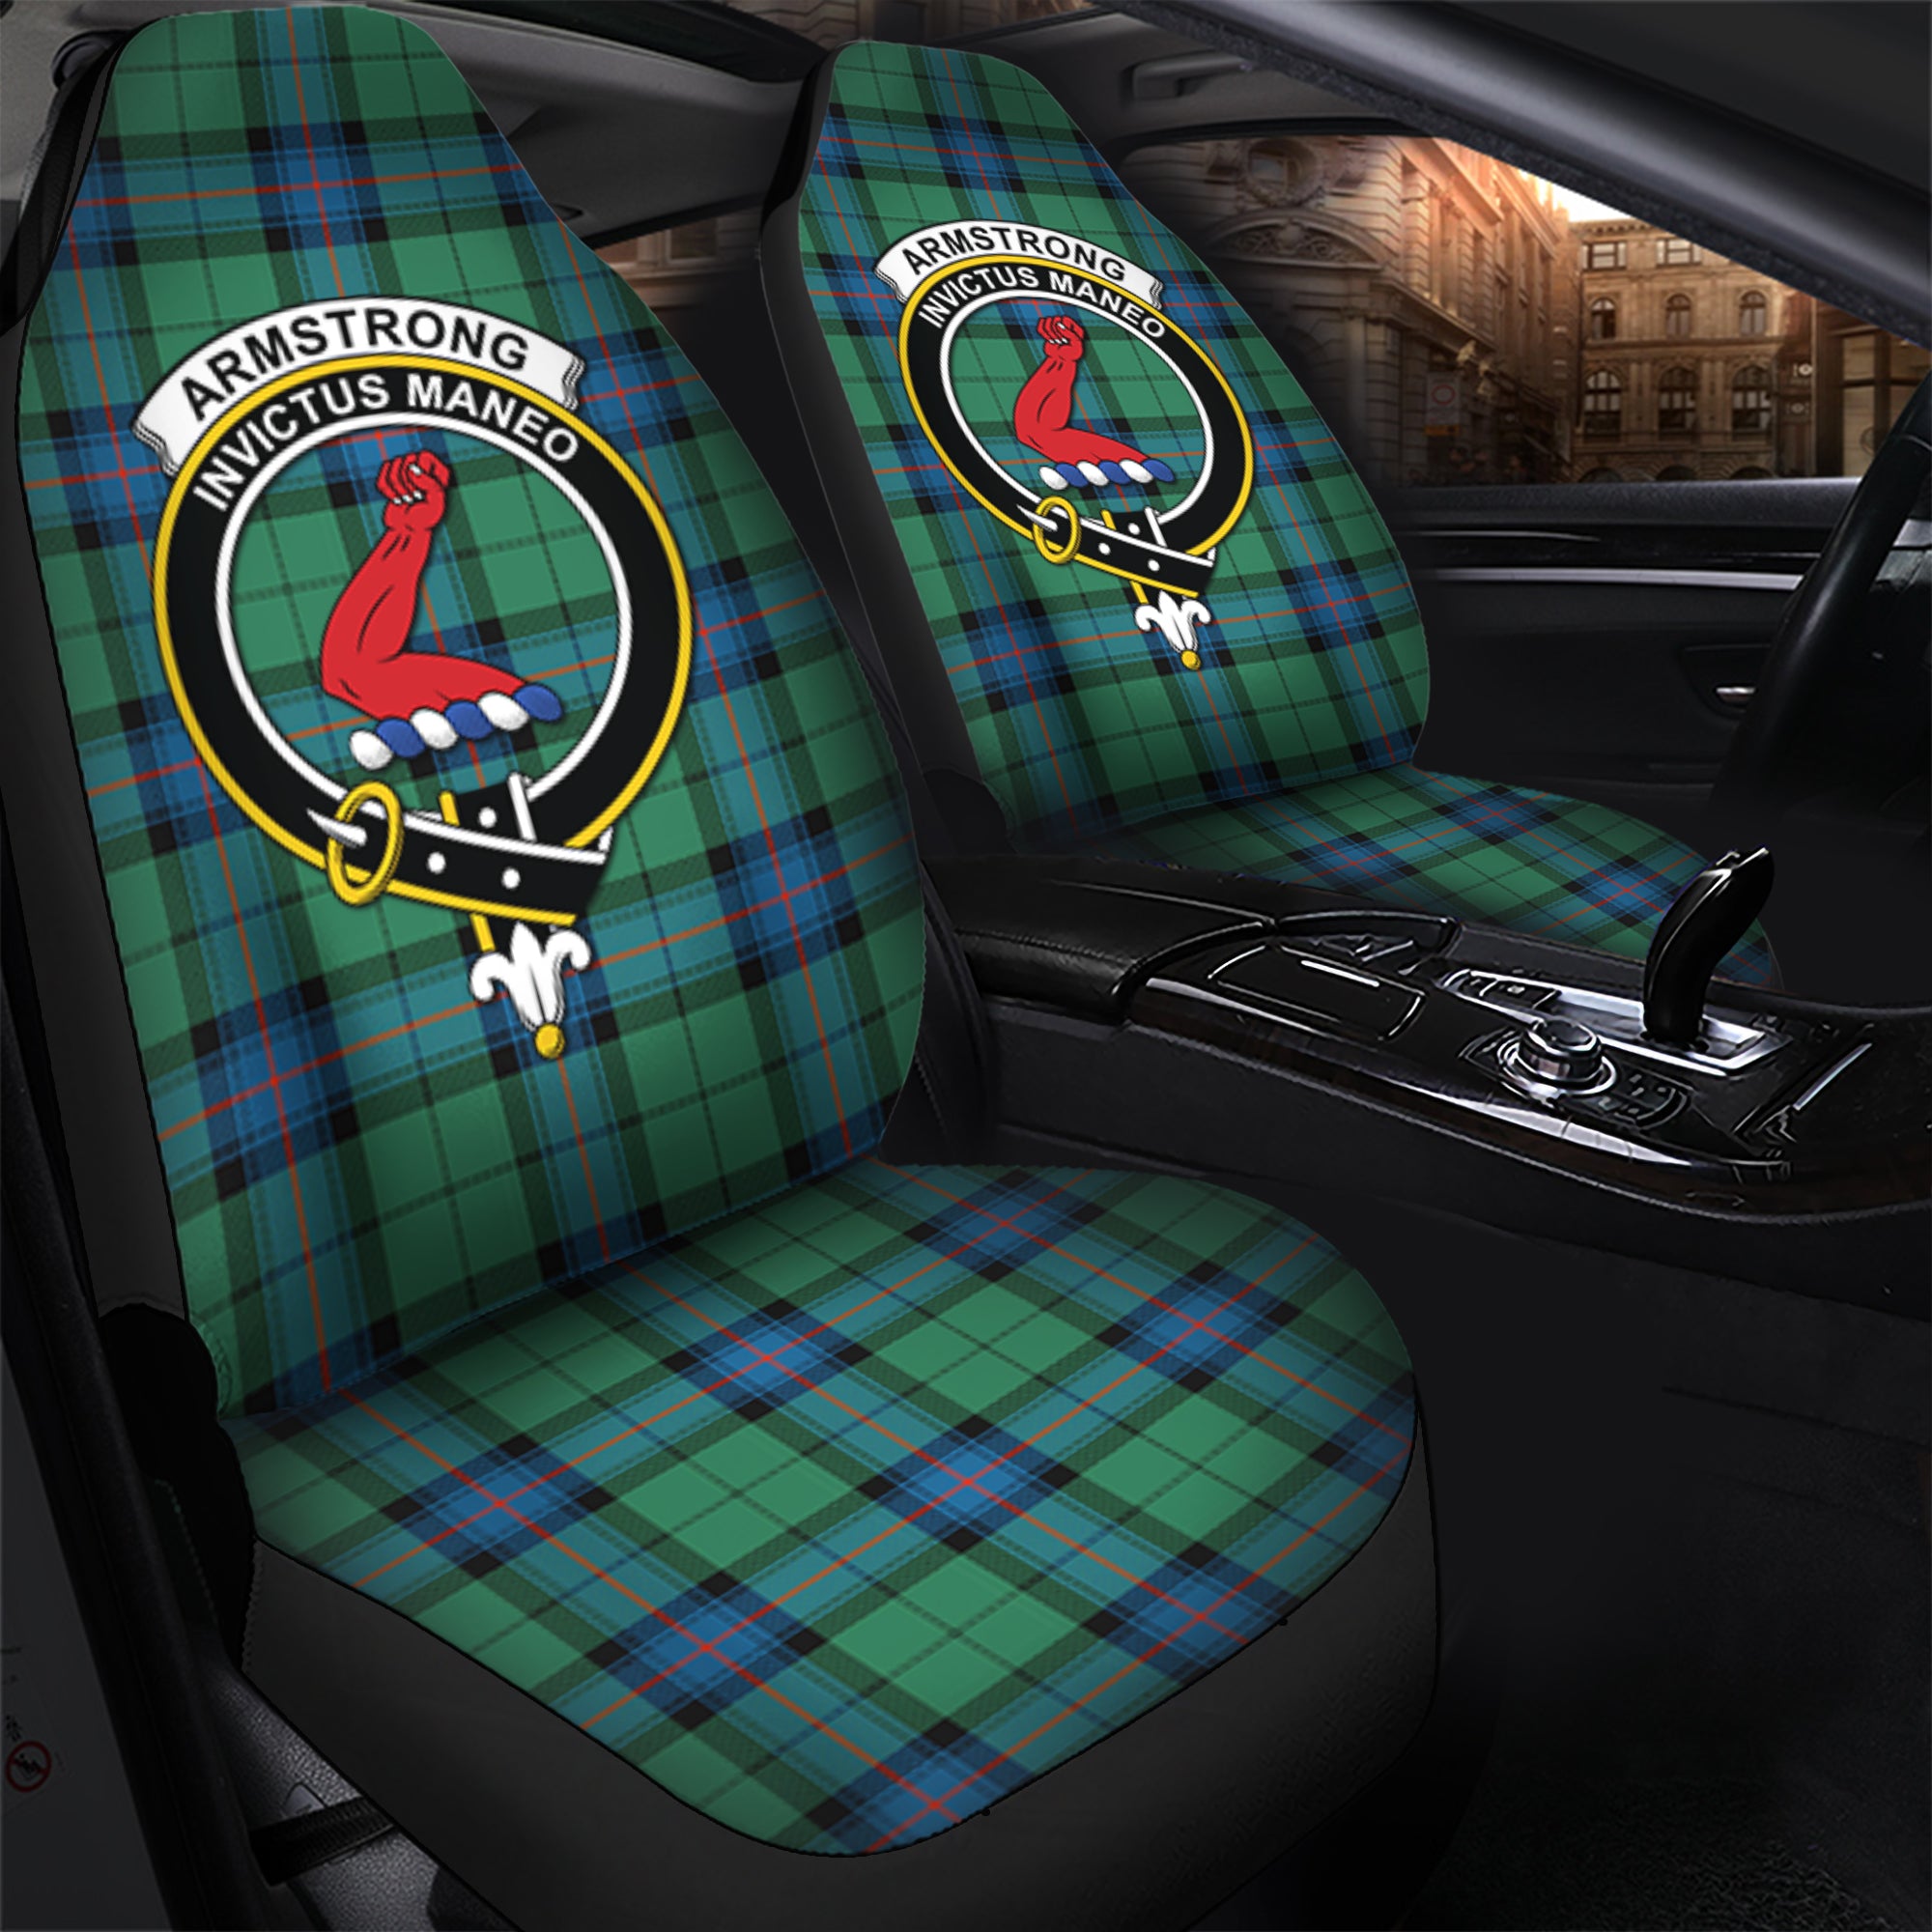 Armstrong Ancient Clan Tartan Car Seat Cover, Family Crest Tartan Seat Cover TS23